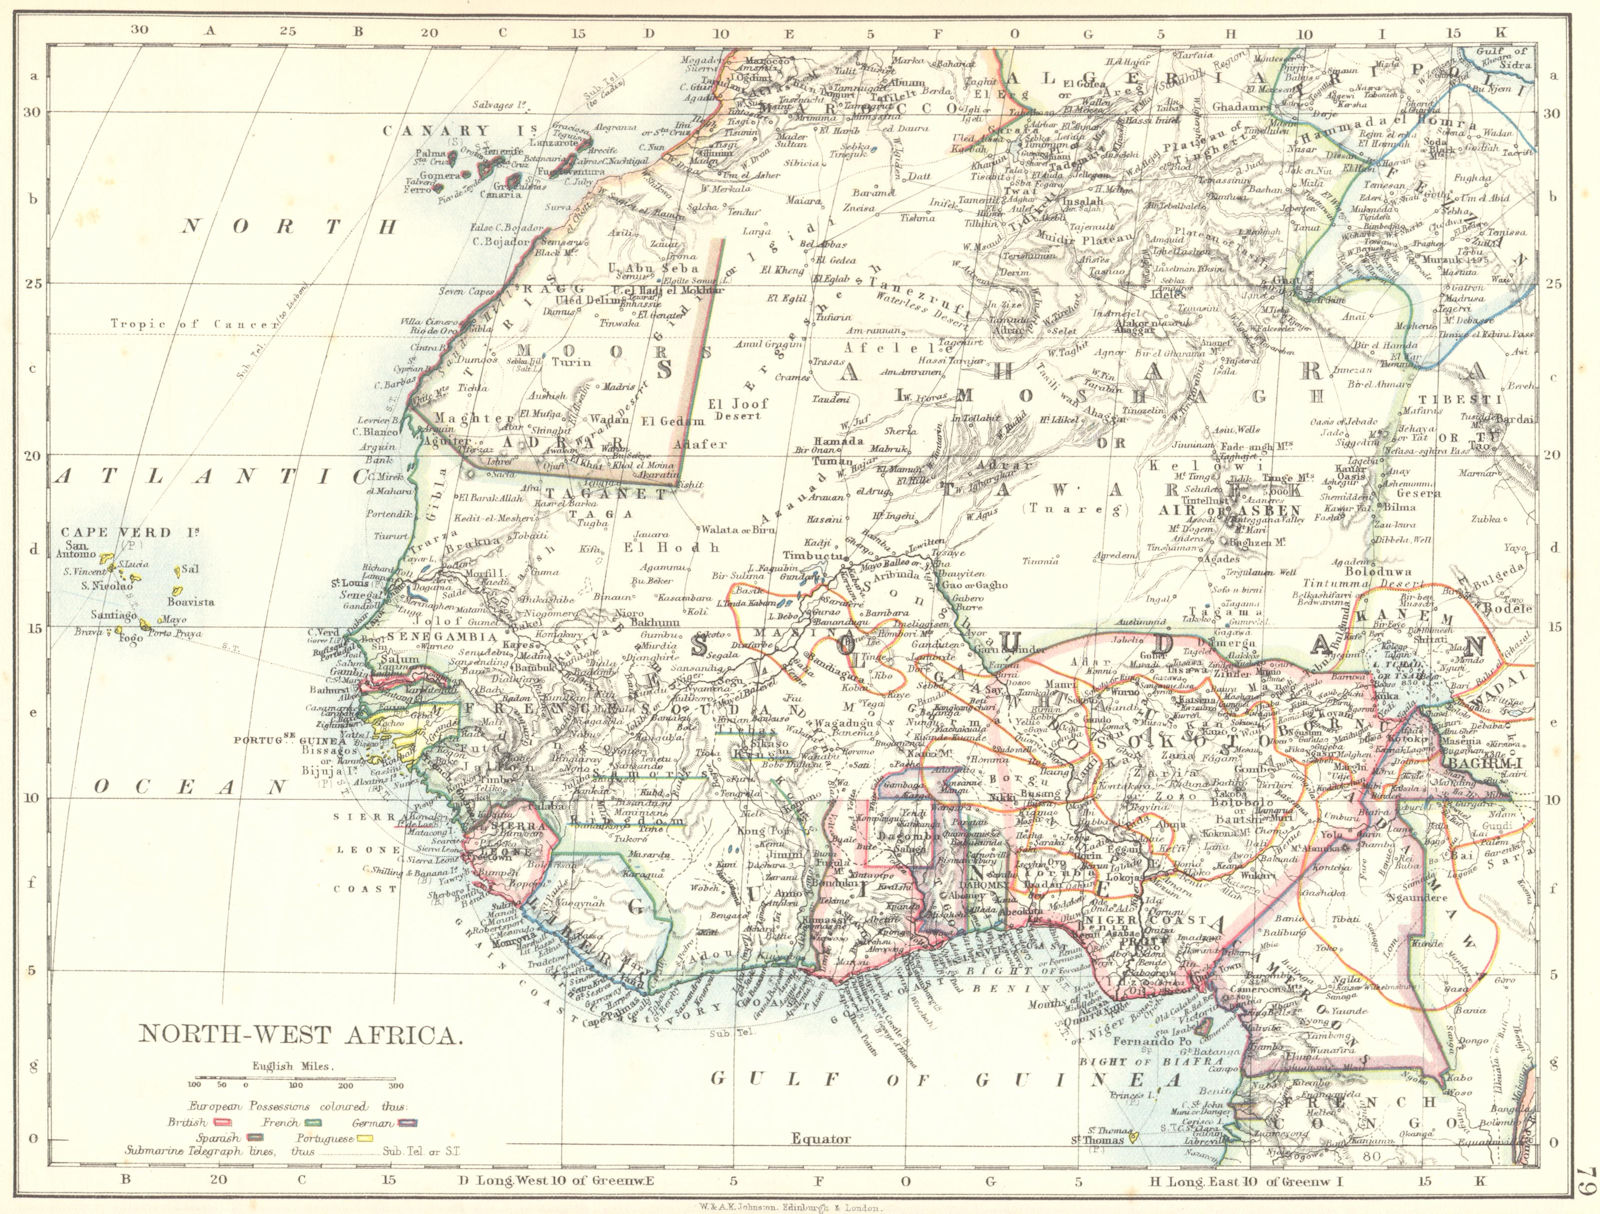 COLONIAL WEST AFRICA. Tribal areas. Caravan routes. Niger Coast Prot. 1899 map